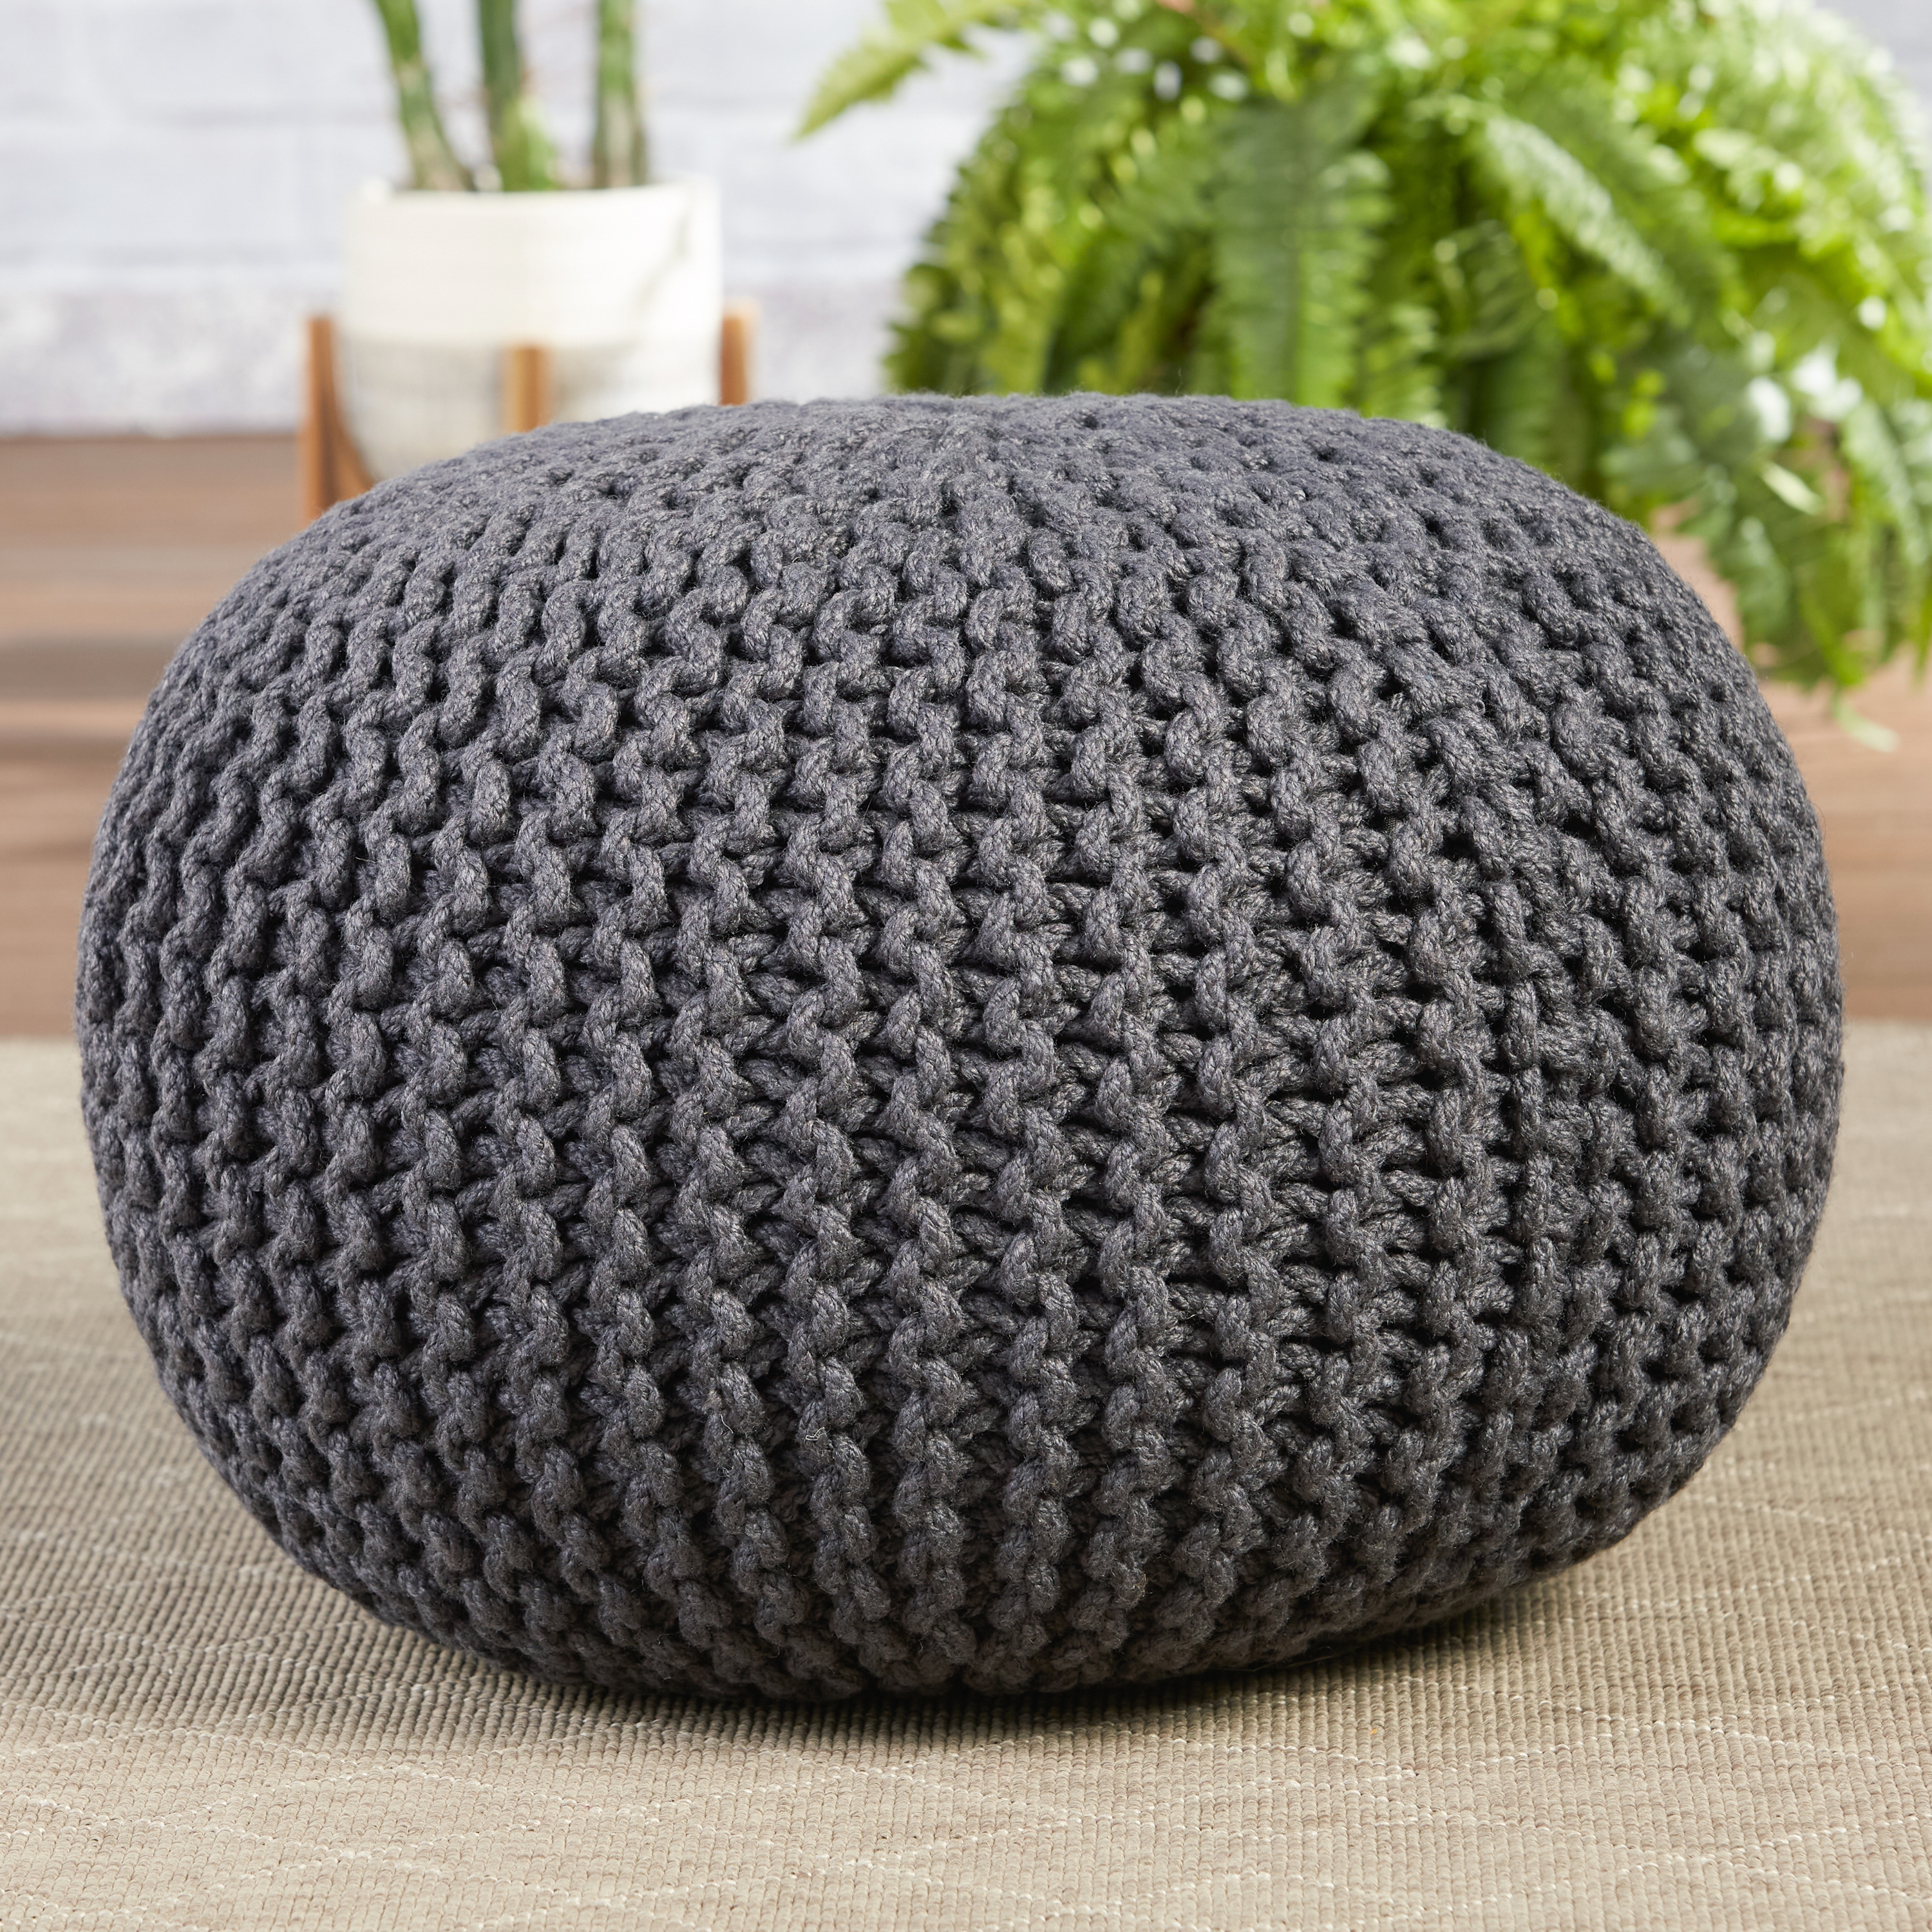 Vibe by Asilah Indoor/ Outdoor Round Pouf, Dark Gray - Image 2